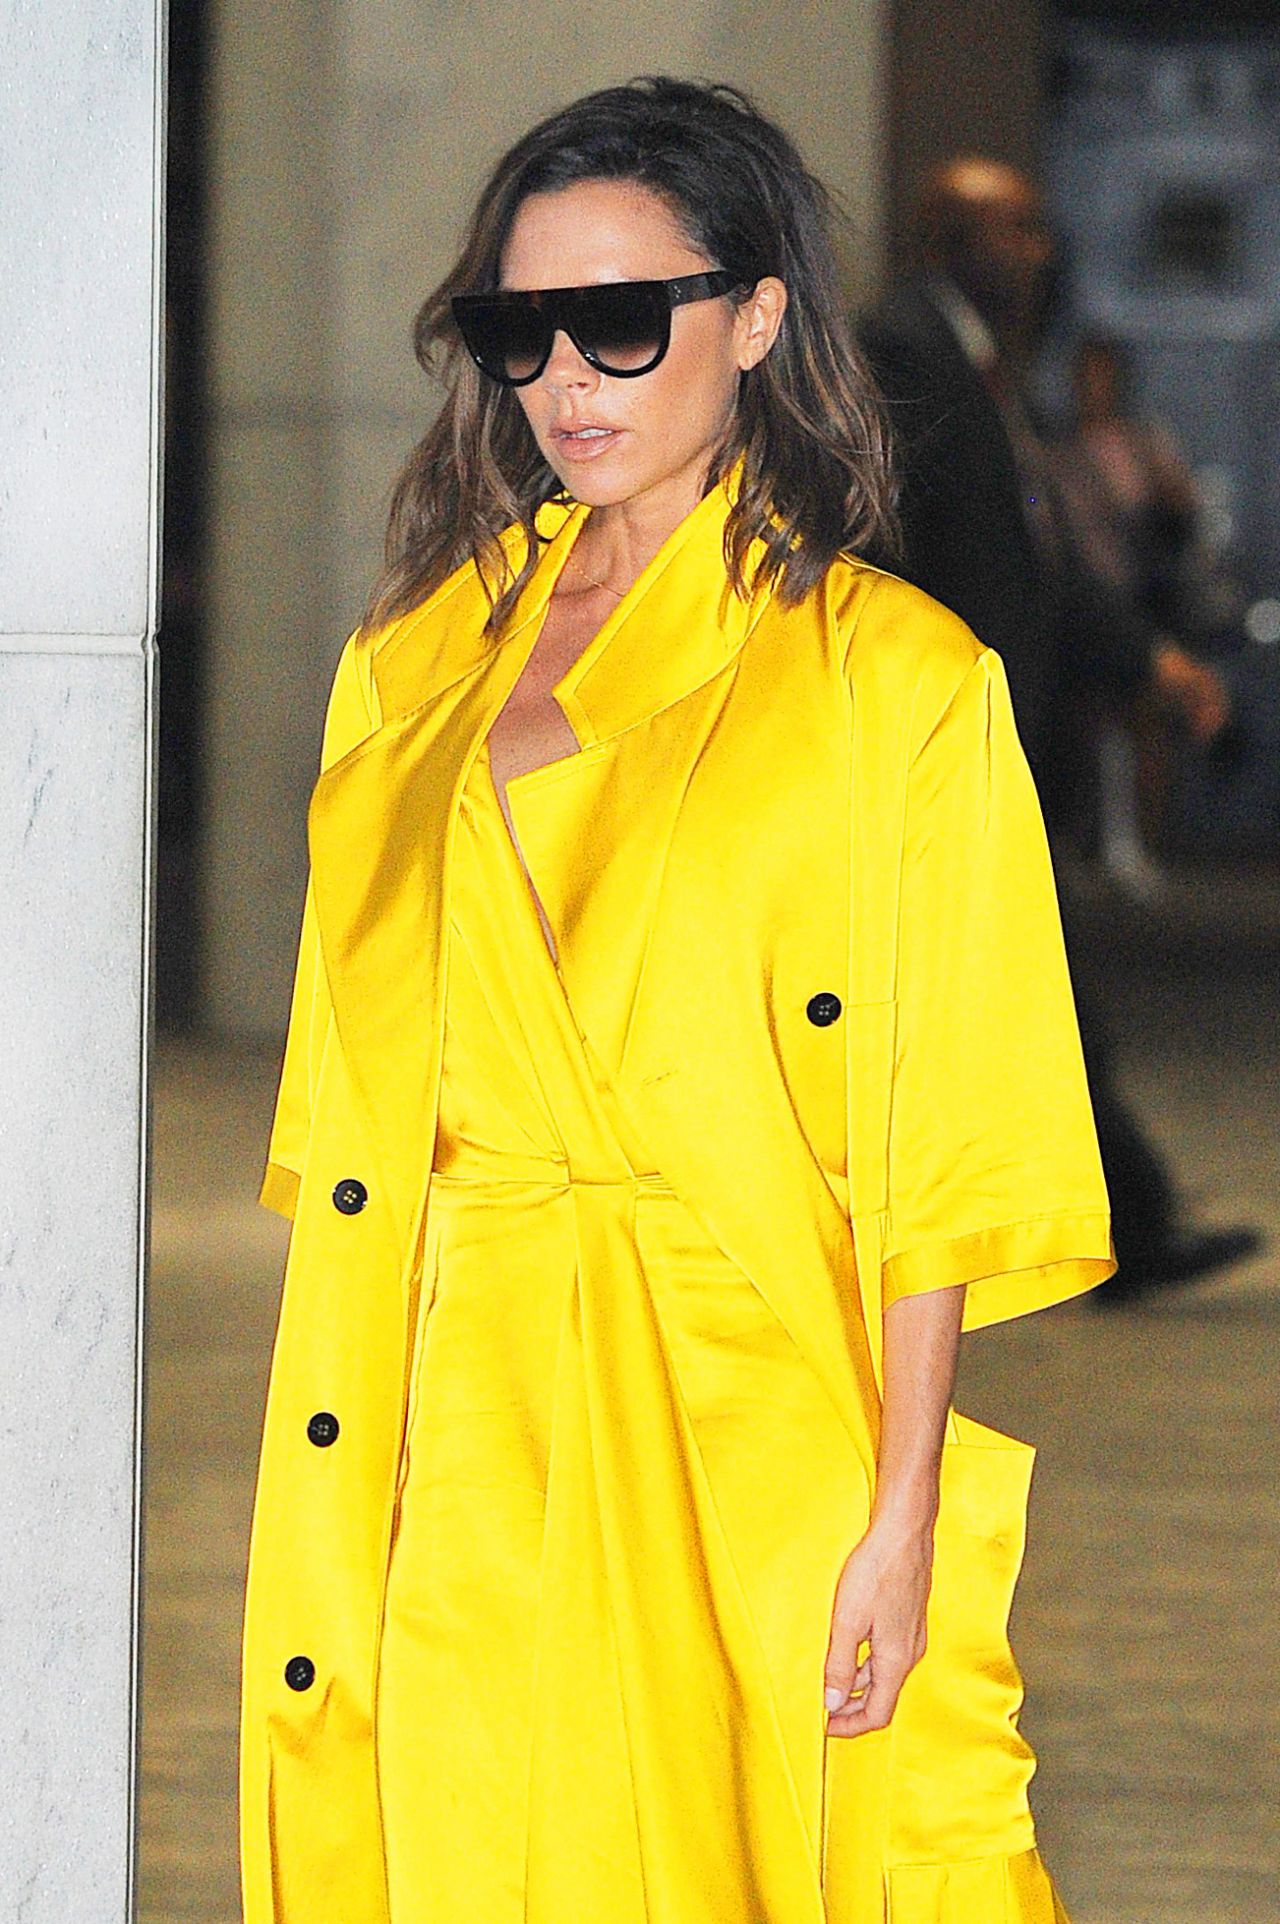 Victoria Beckham Chic Style - Arrives for a Meeting in Midtown, NYC 6 ...